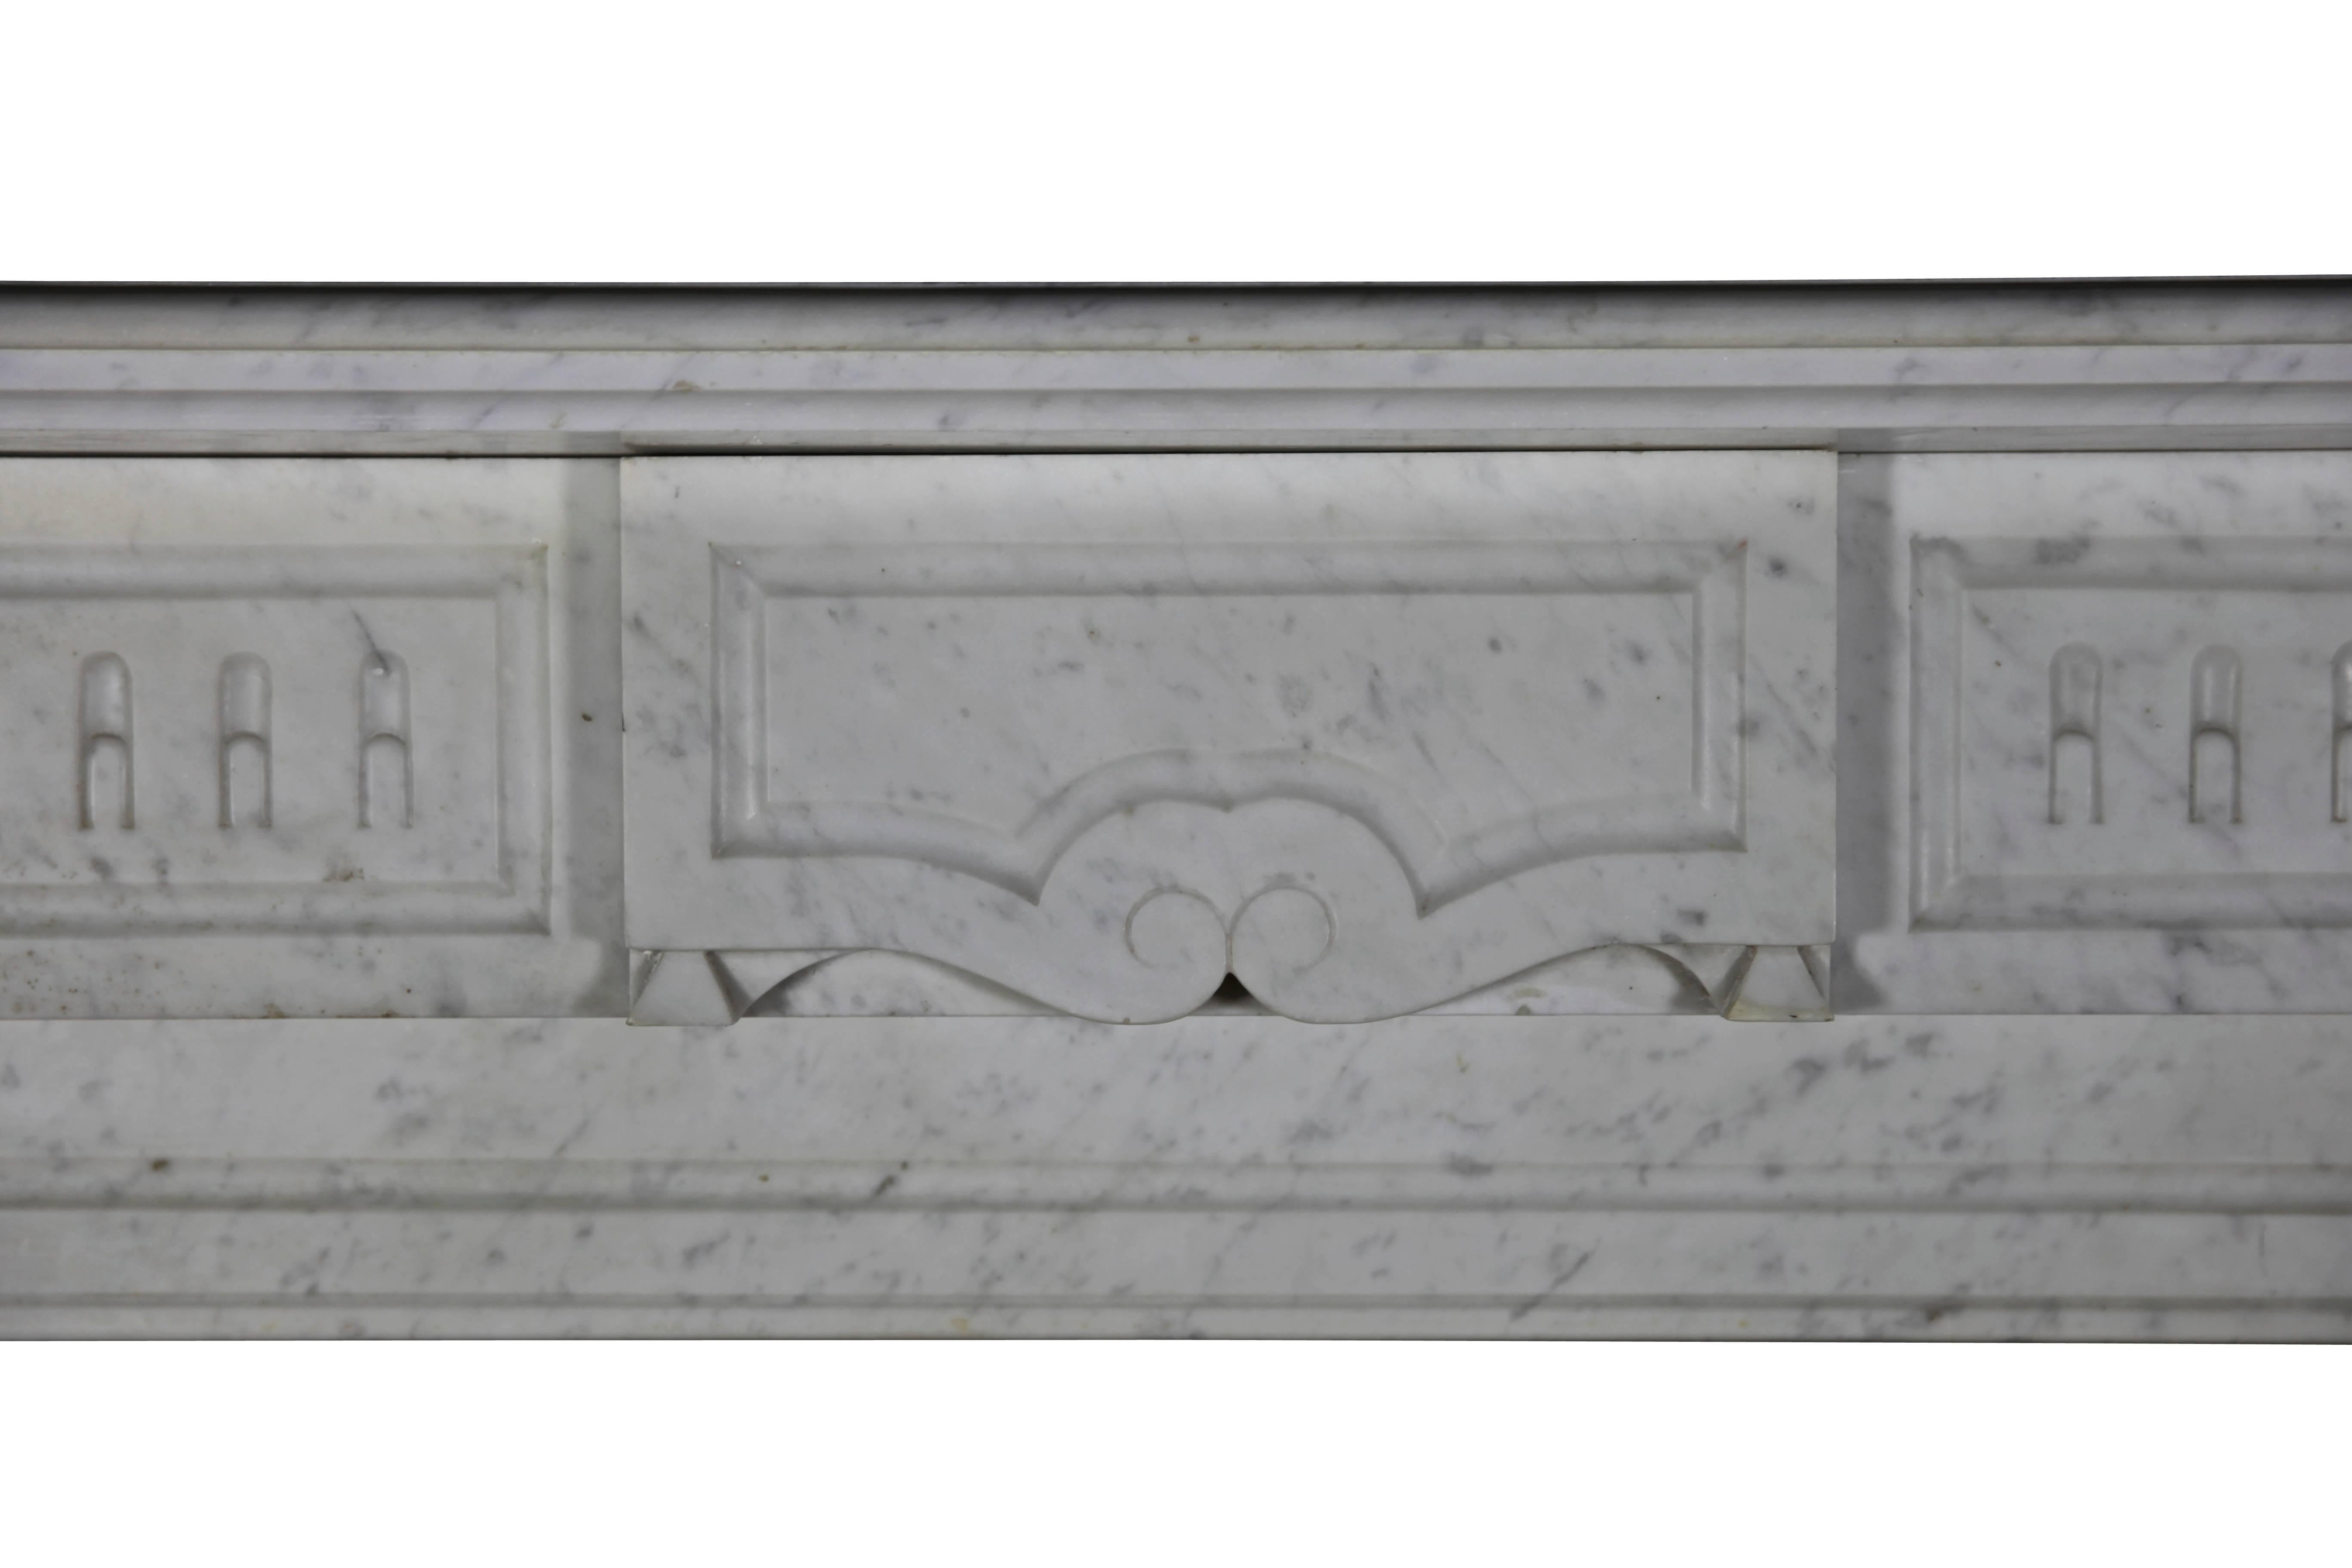 Fine Belgian vintage Carrara Marble fireplace surround from the city of Ghent. 19th century.
Measurements:
156 cm Exterior Width 61,42 Inch
120 cm Exterior Height 47,24 Inch
91 cm Interior Width 35,83 Inch
88 cm Interior Height 34,65 Inch
29 cm